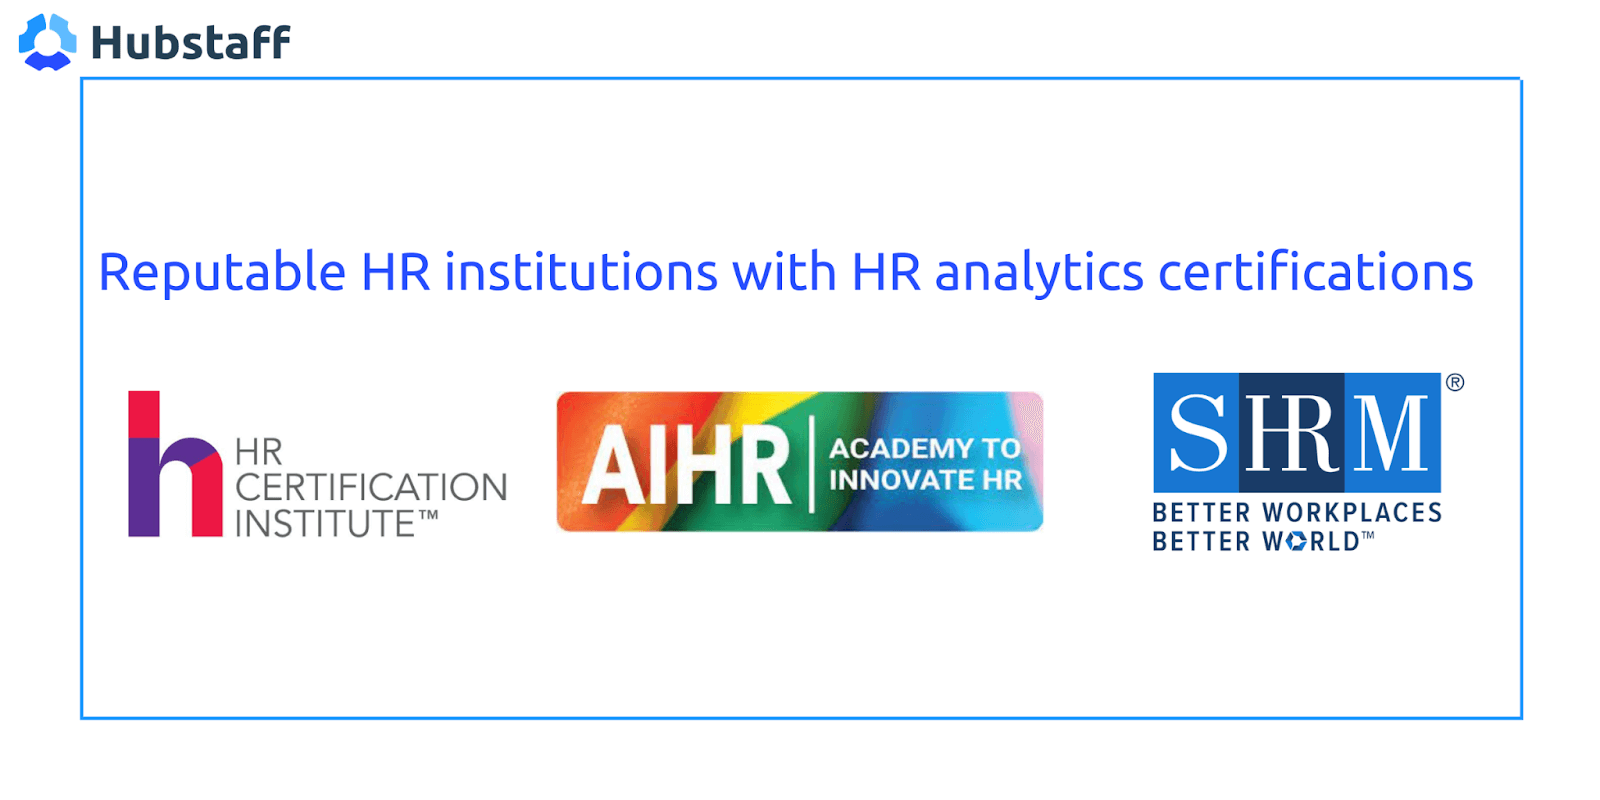 Reputable HR institutions with HR analytics certifications